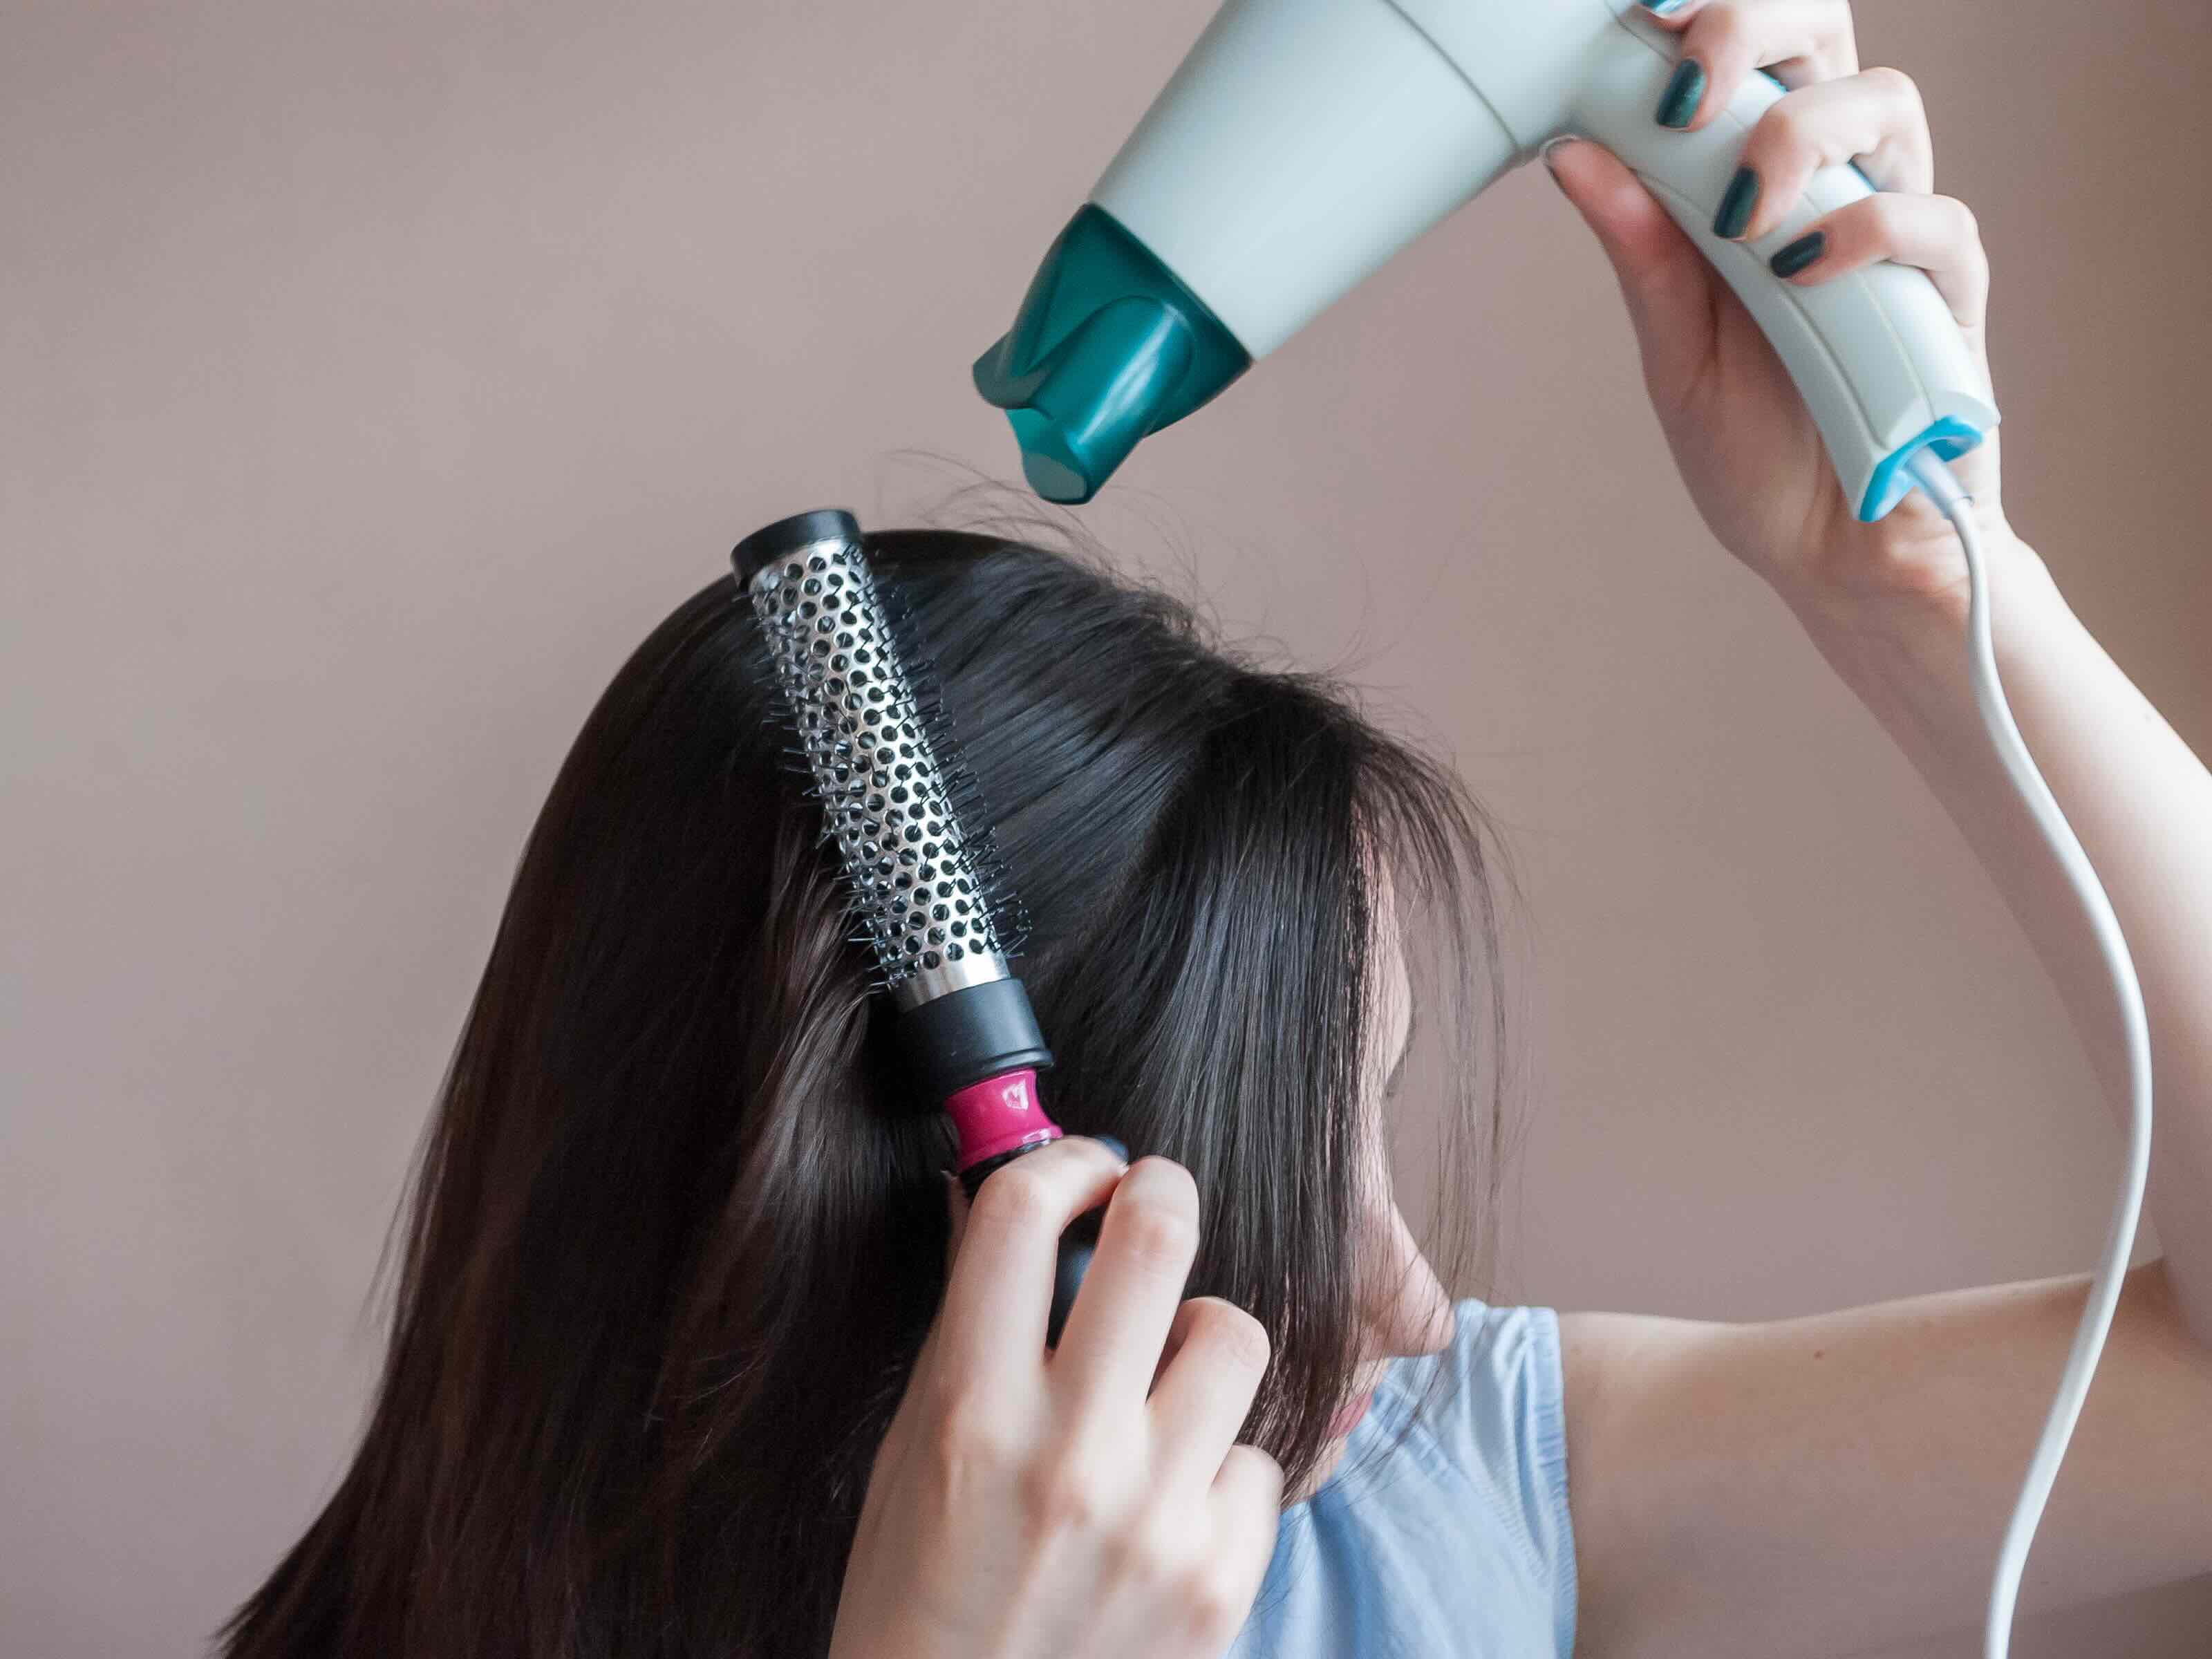 How To Straighten Hair With A Blow Dryer